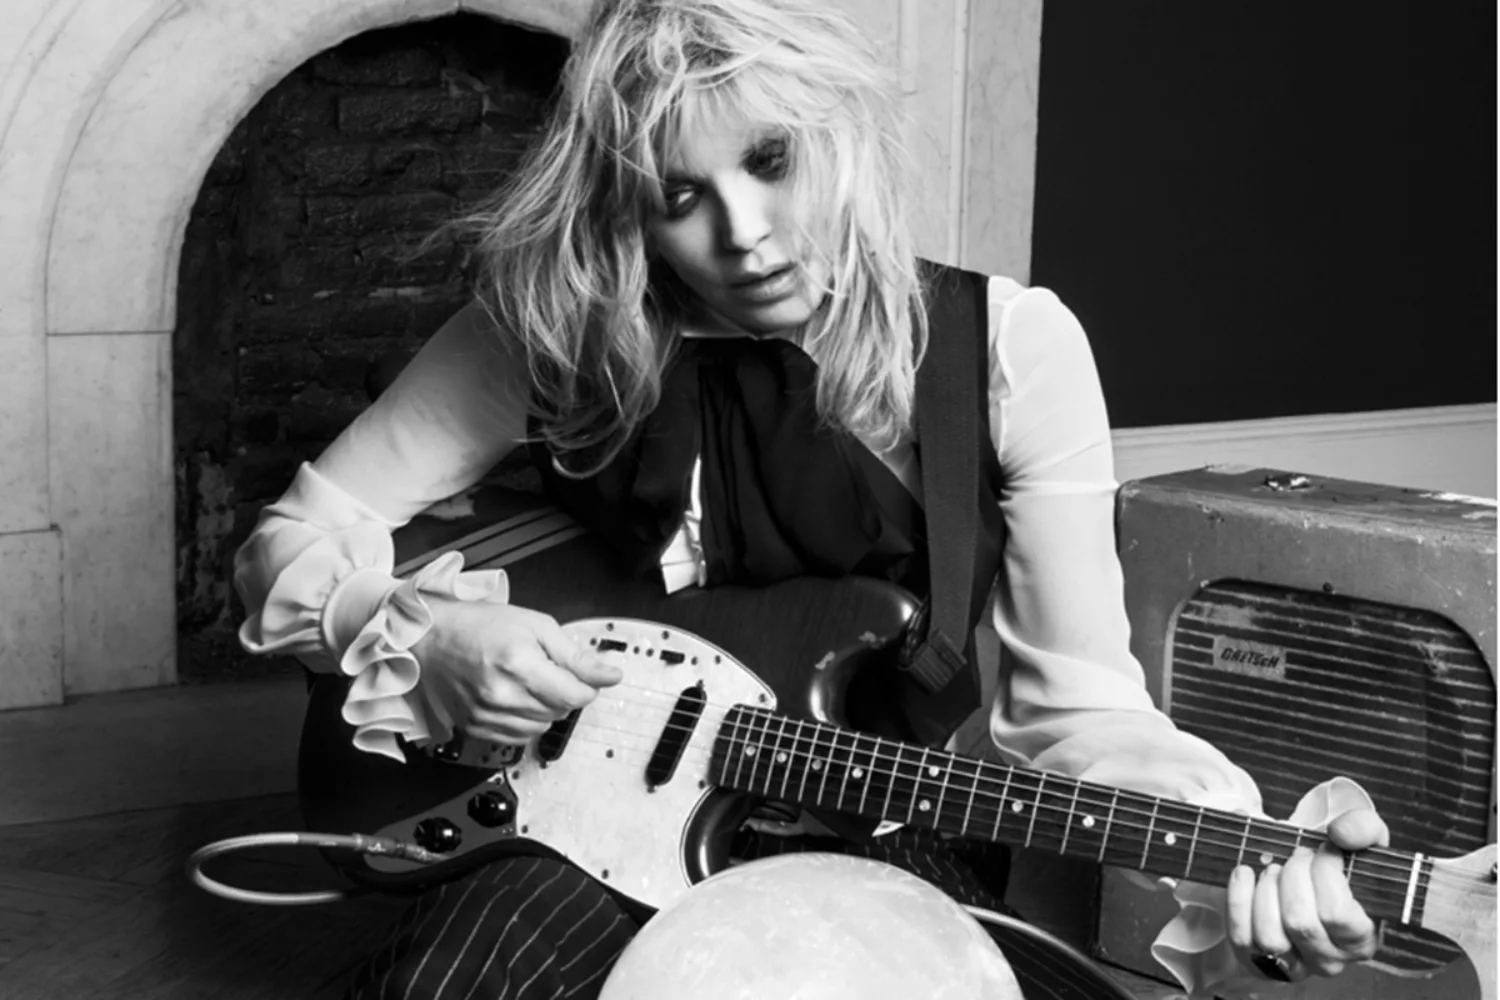 Courtney Love releases ‘Miss Narcissist’ single